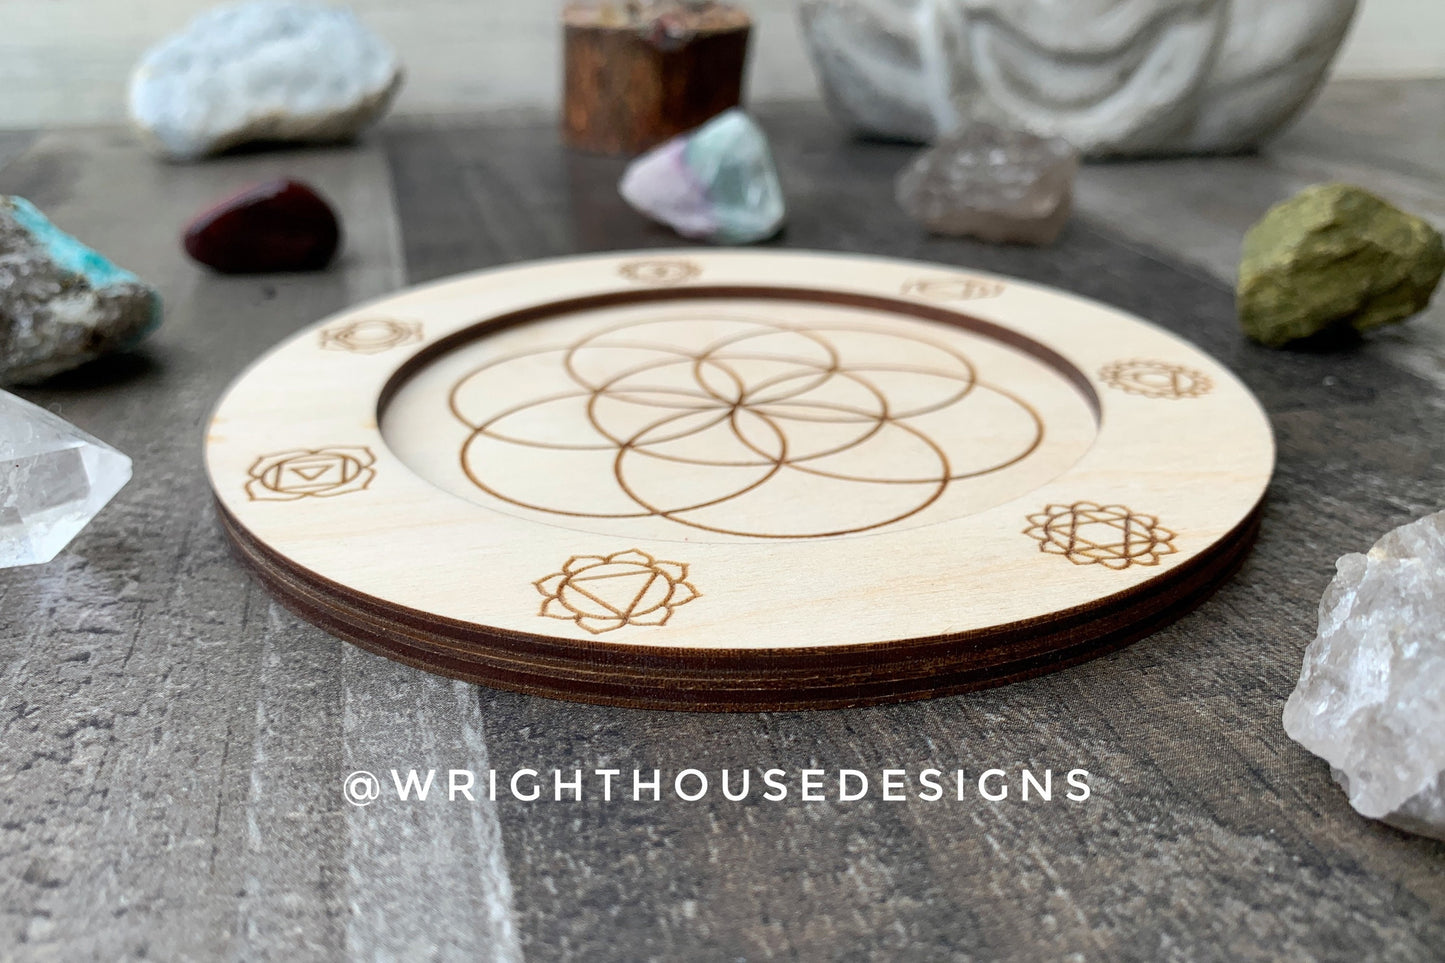 Geometric Wooden Trinket Trays - Engraved Coffee Coasters - Decorative Desk and Night Stand Organizer